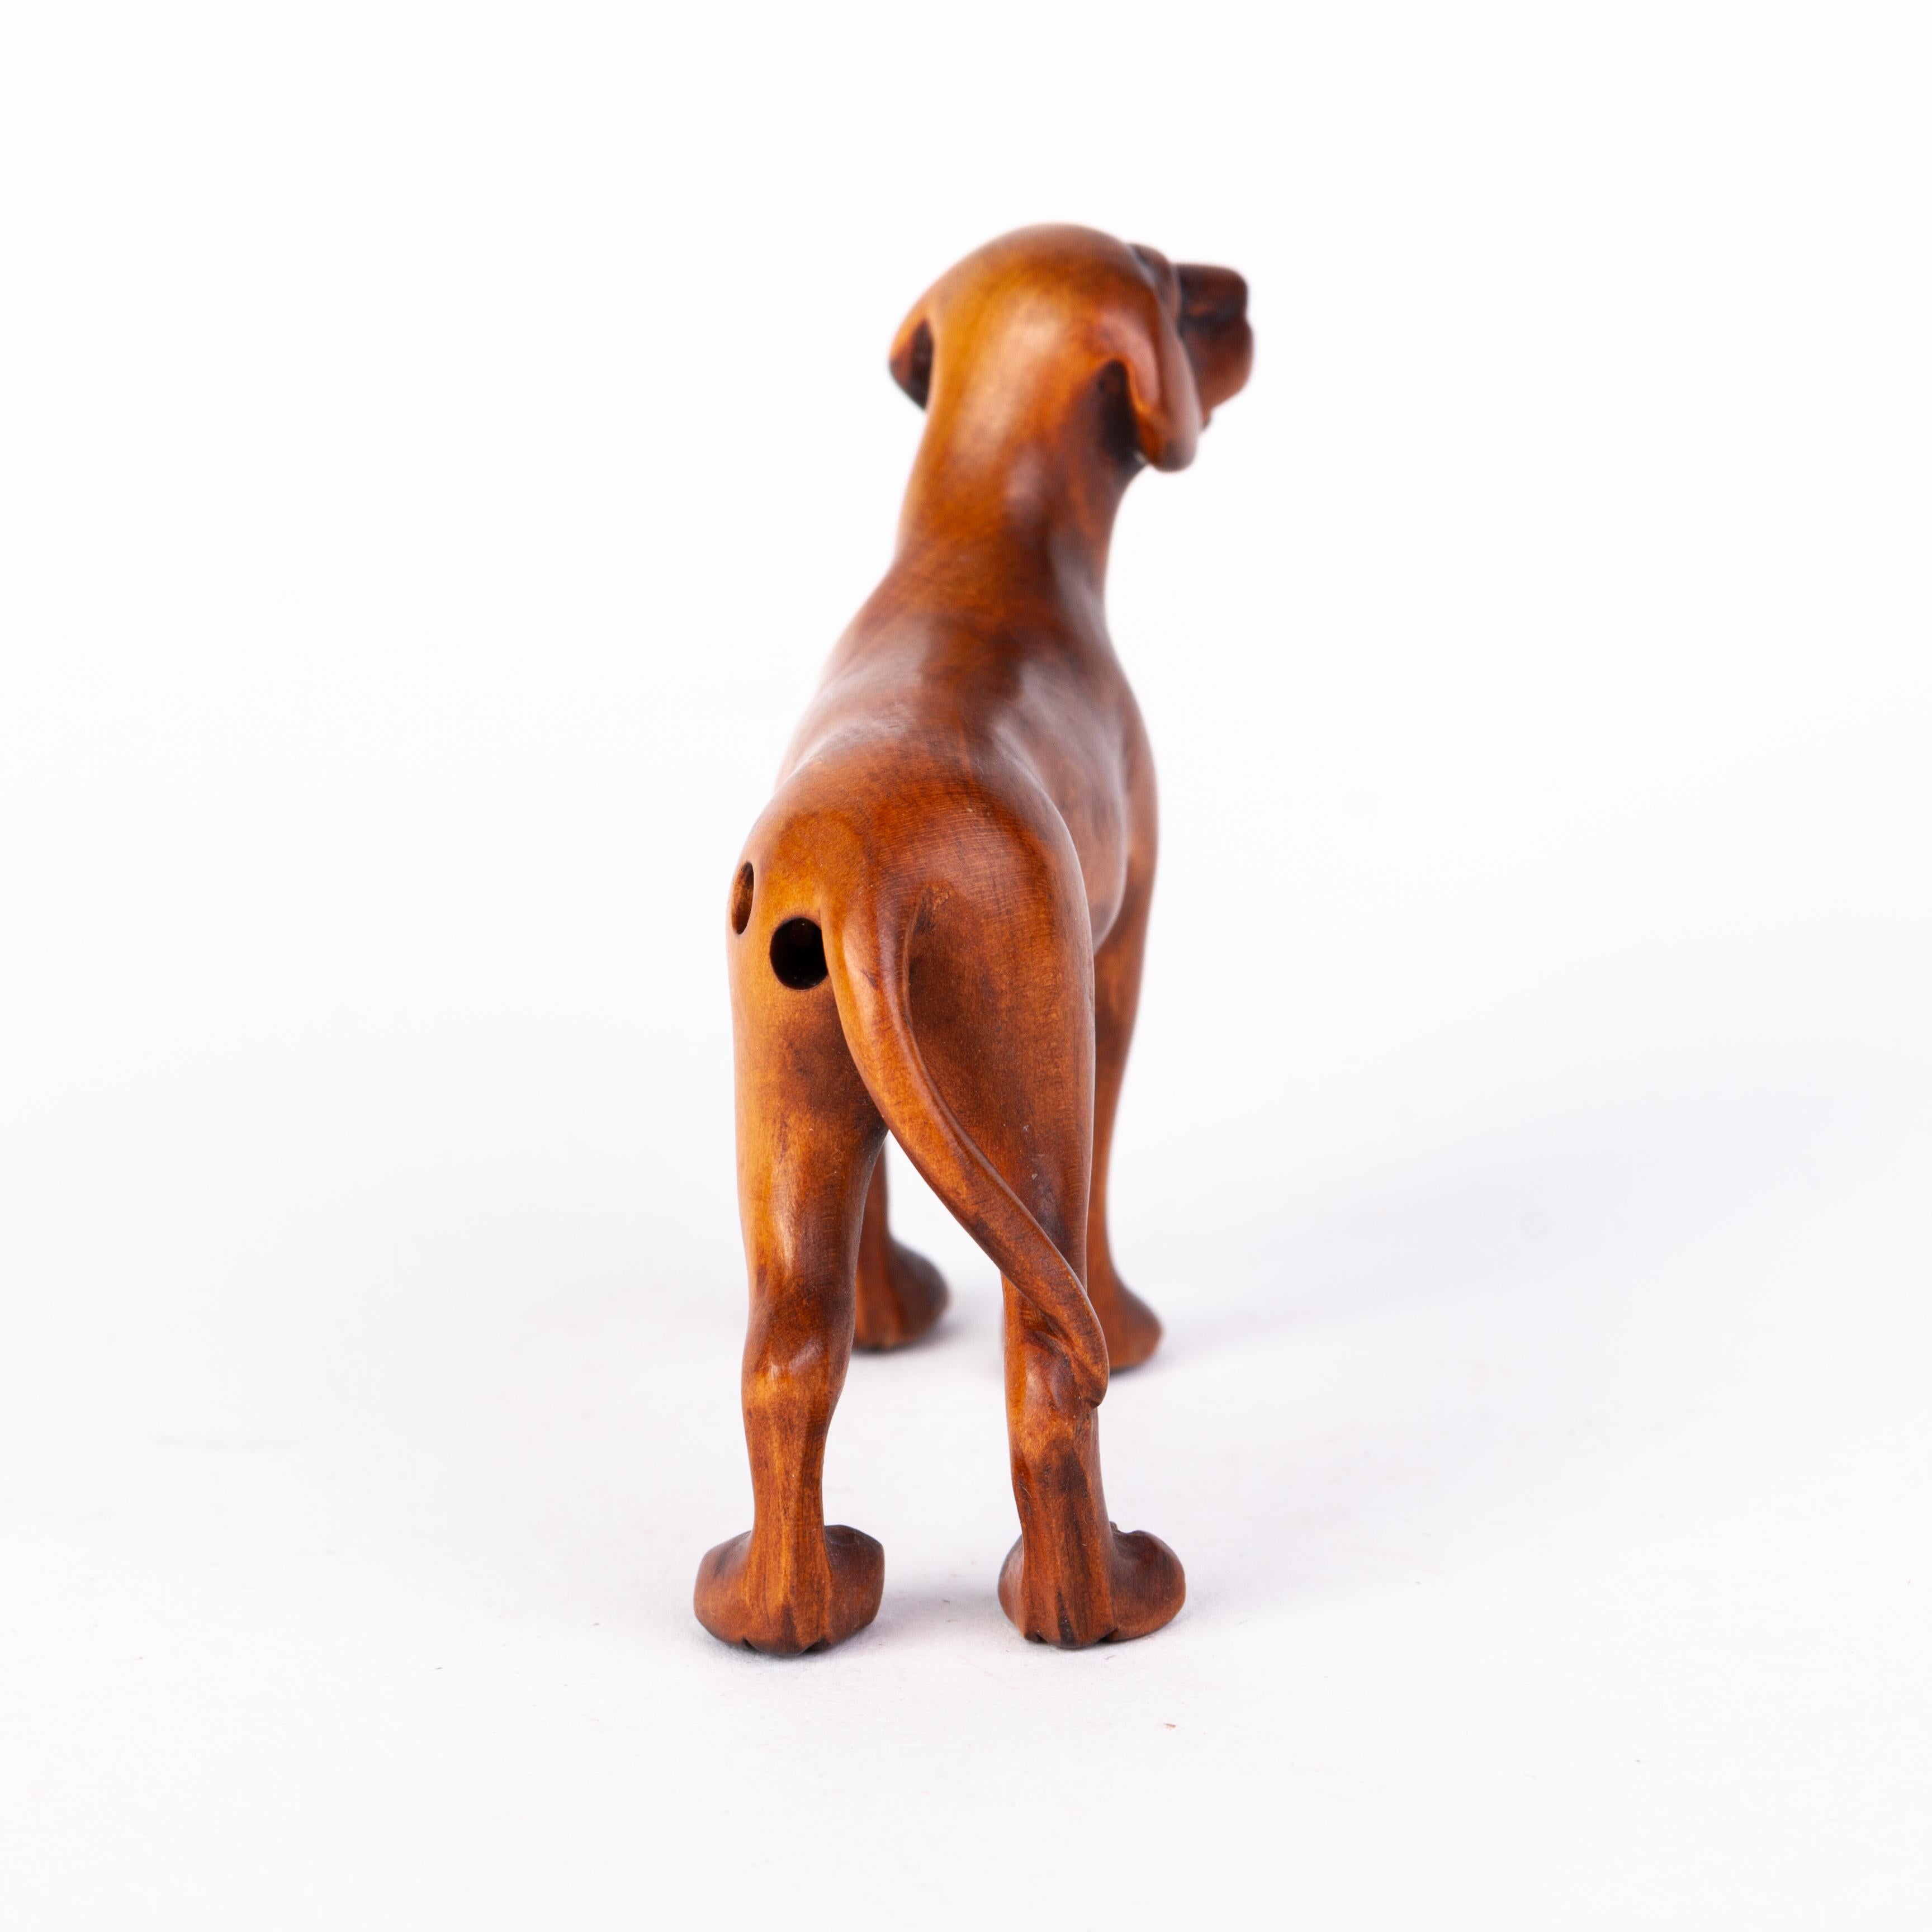 Japanese Carved boxwood Netsuke Inro Ojime
Good condition
From a private collection.
Free international shipping.